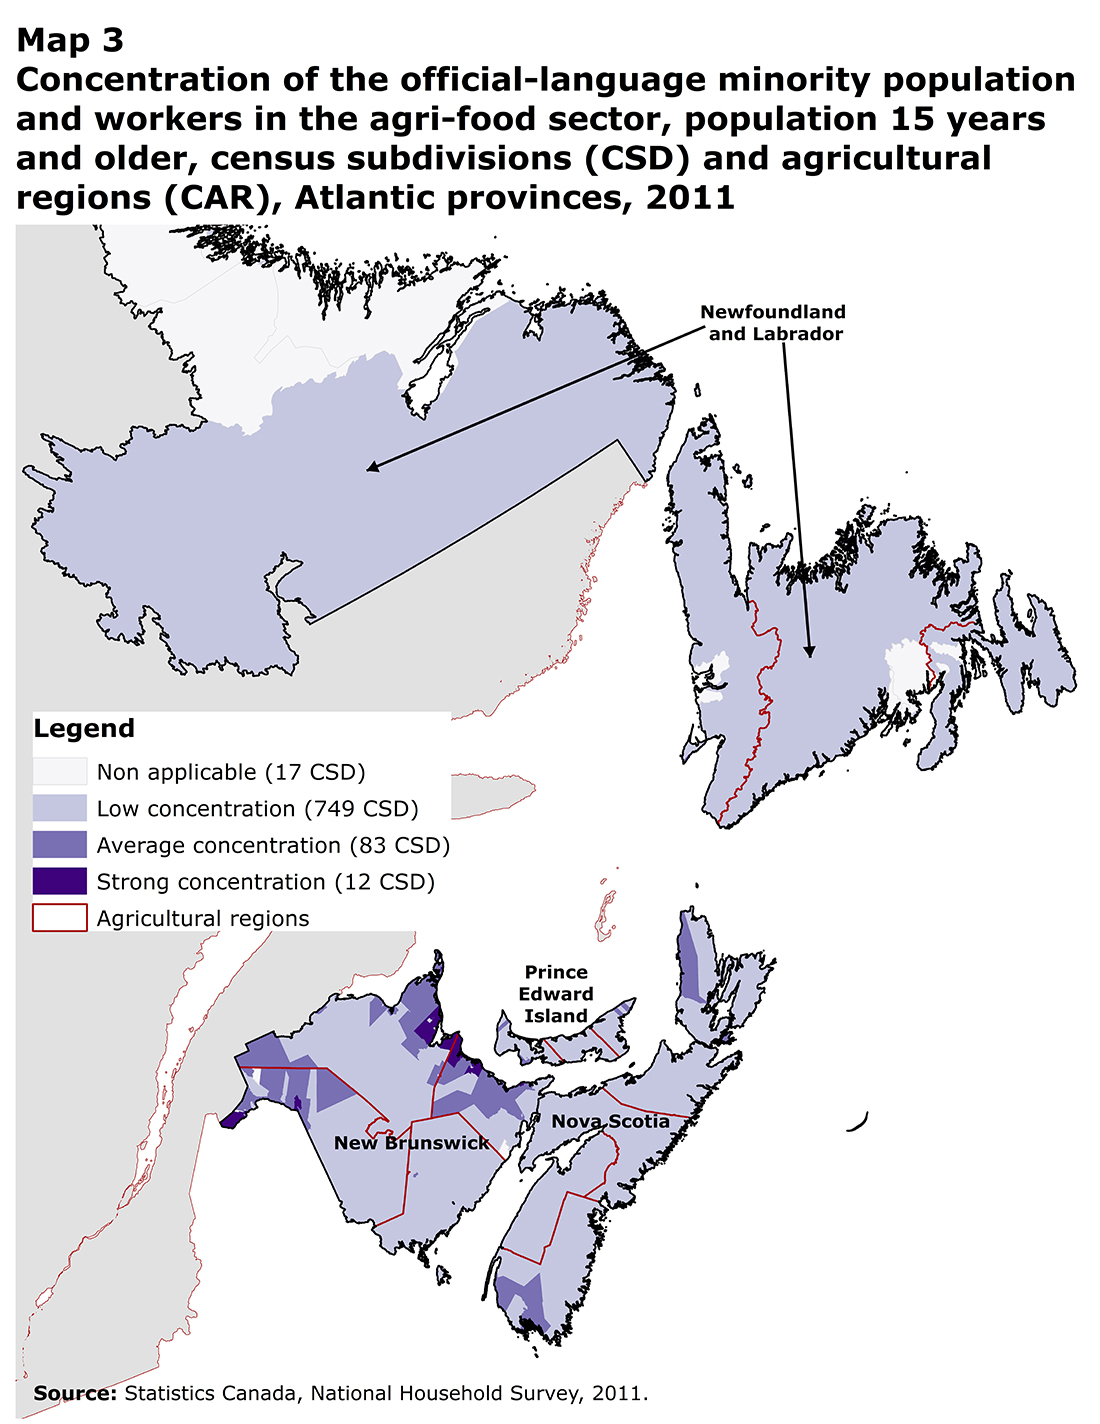 Map 3 Concentration of the official-language minority population and workers in the agri-food sector, population 15 years and older, census subdivisions (CSD) and agricultural regions (CAR), Atlantic provinces, 2011